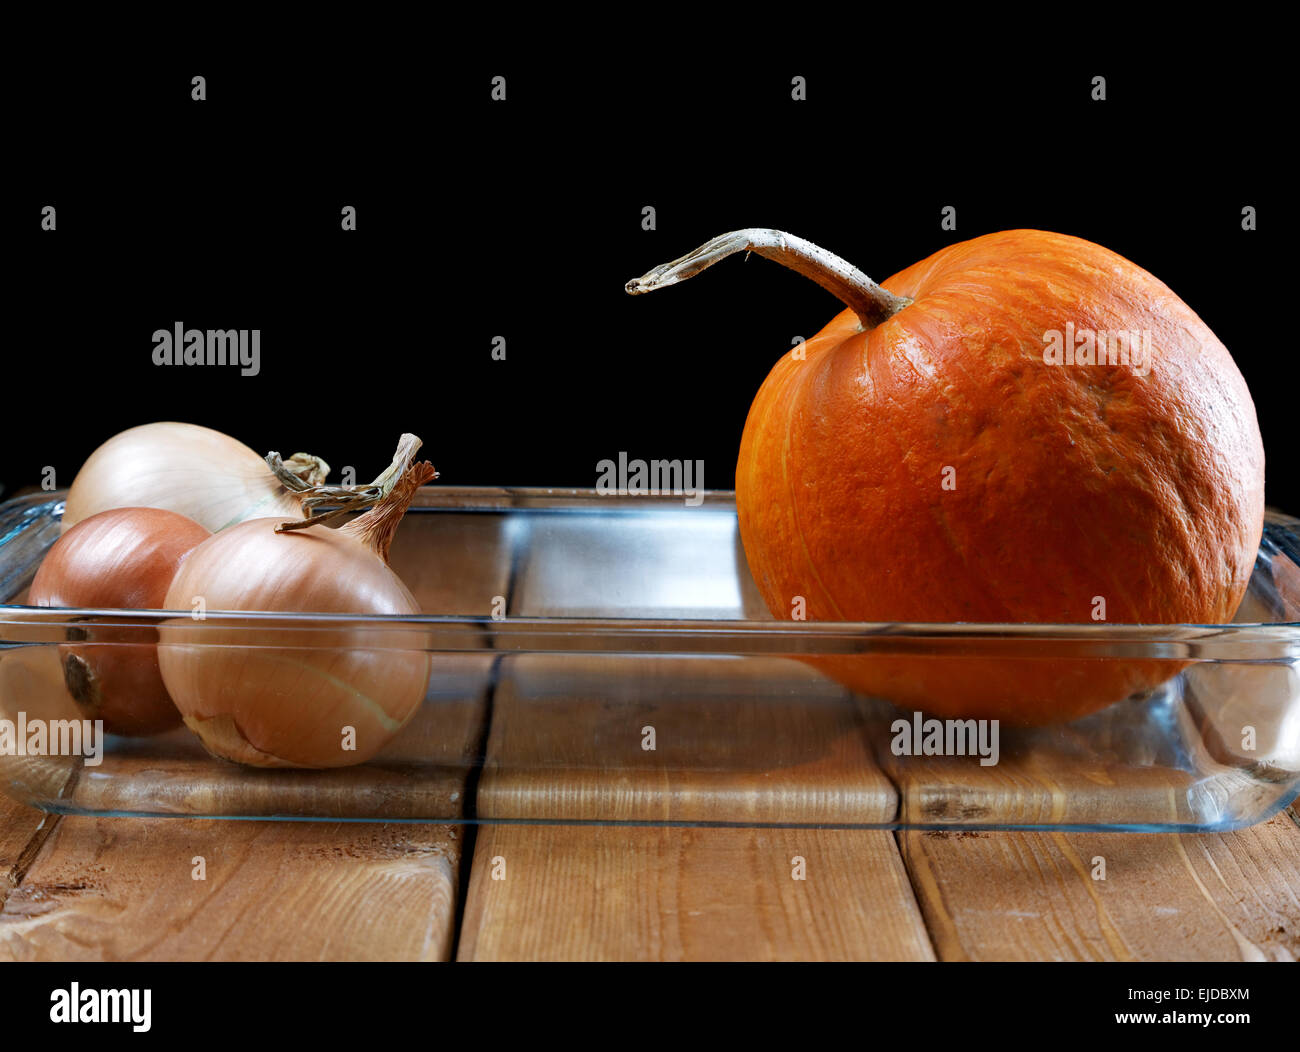 Small pumpkin and onions in a glass plate Stock Photo